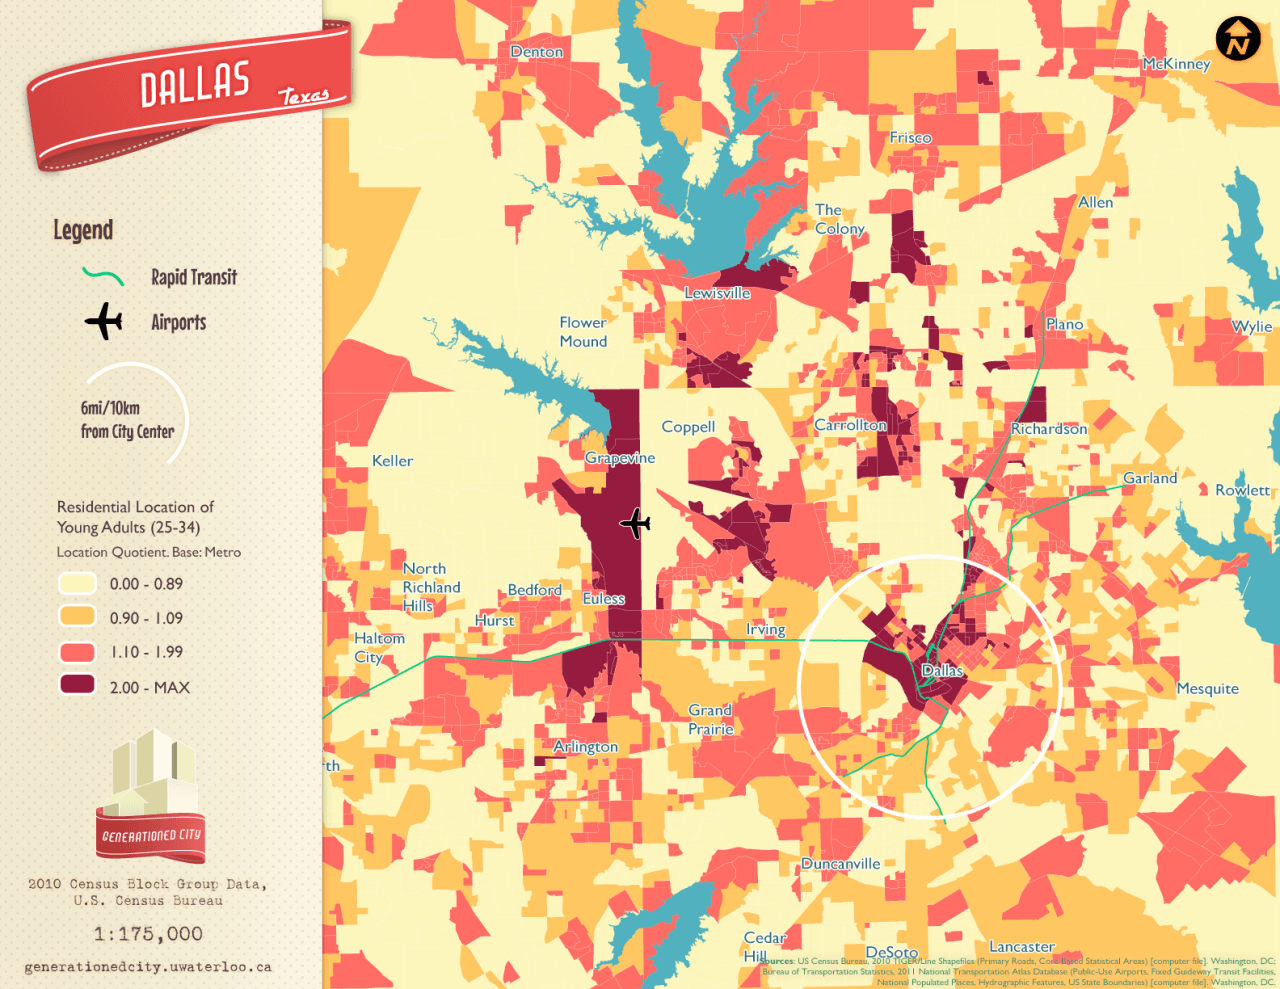 Residential location of young adults in Dallas.